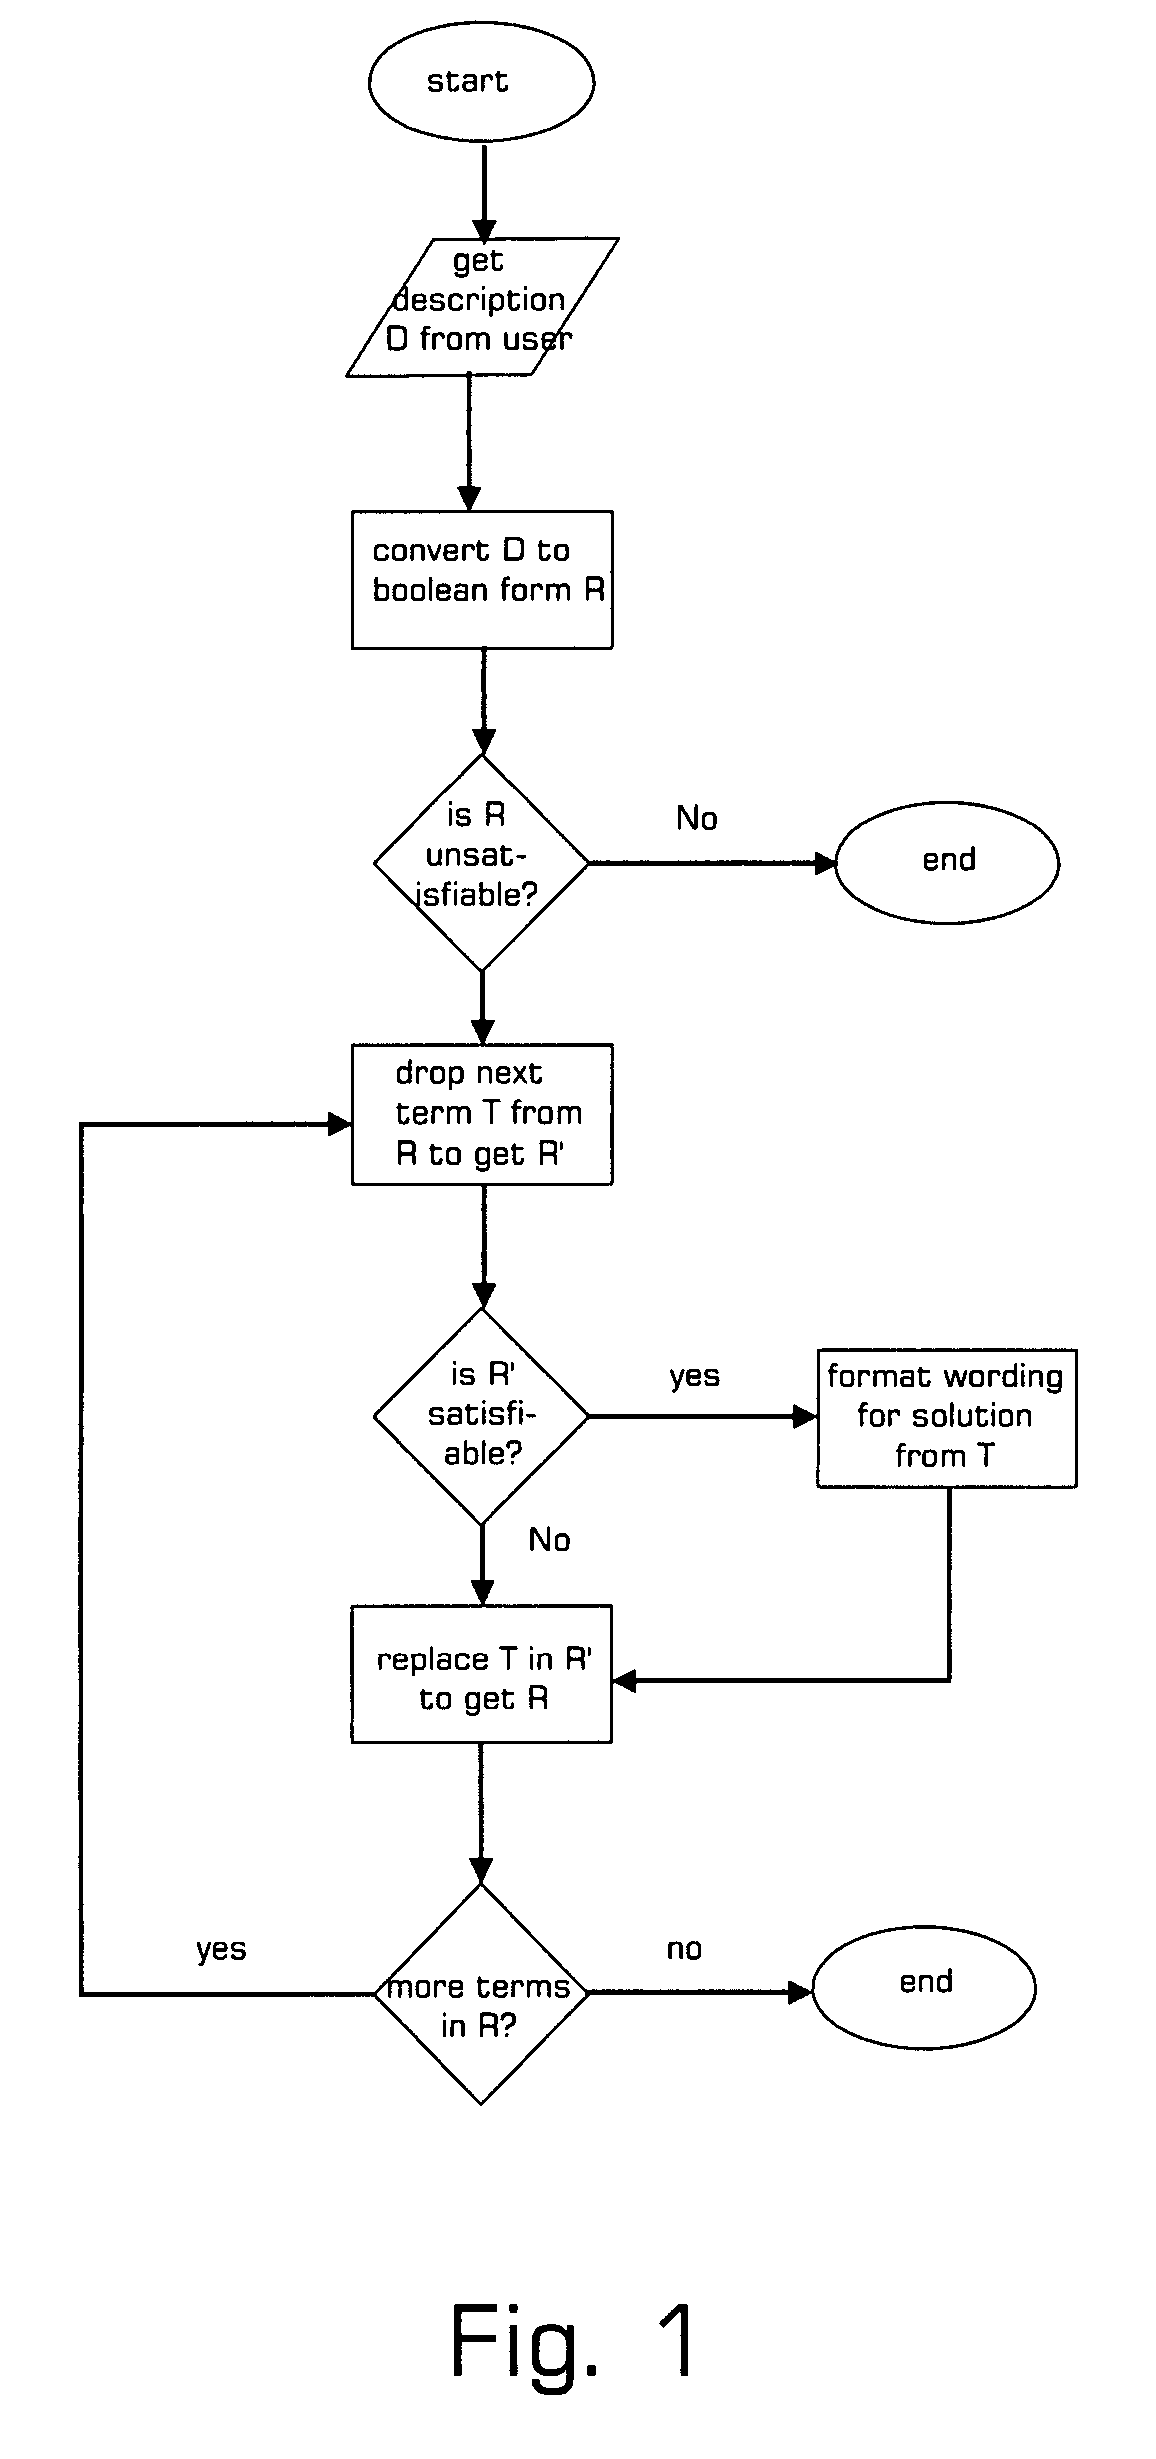 Apparatus and process for conjunctive normal form processing